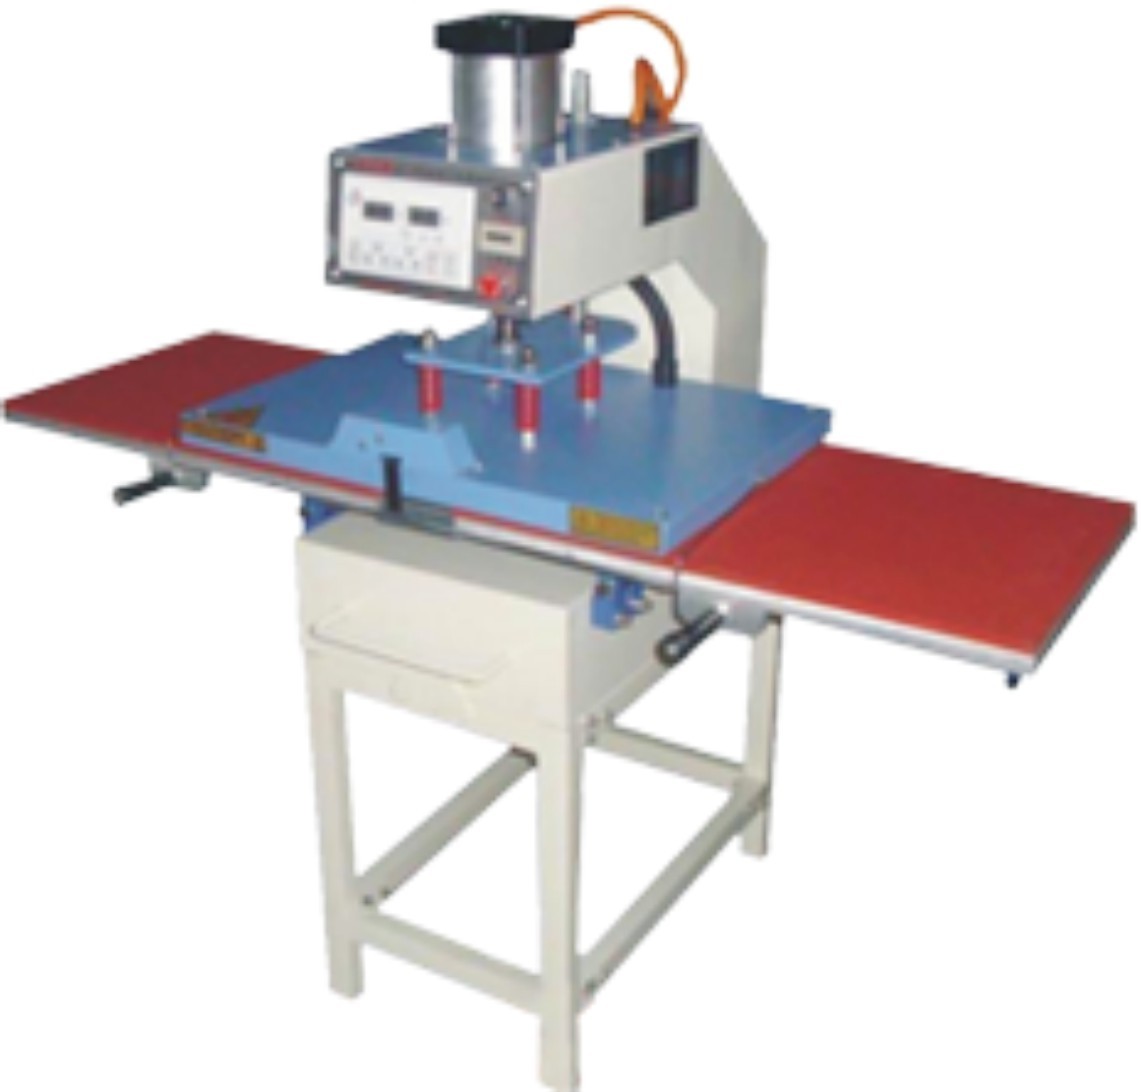 heat transfer machines for t shirts